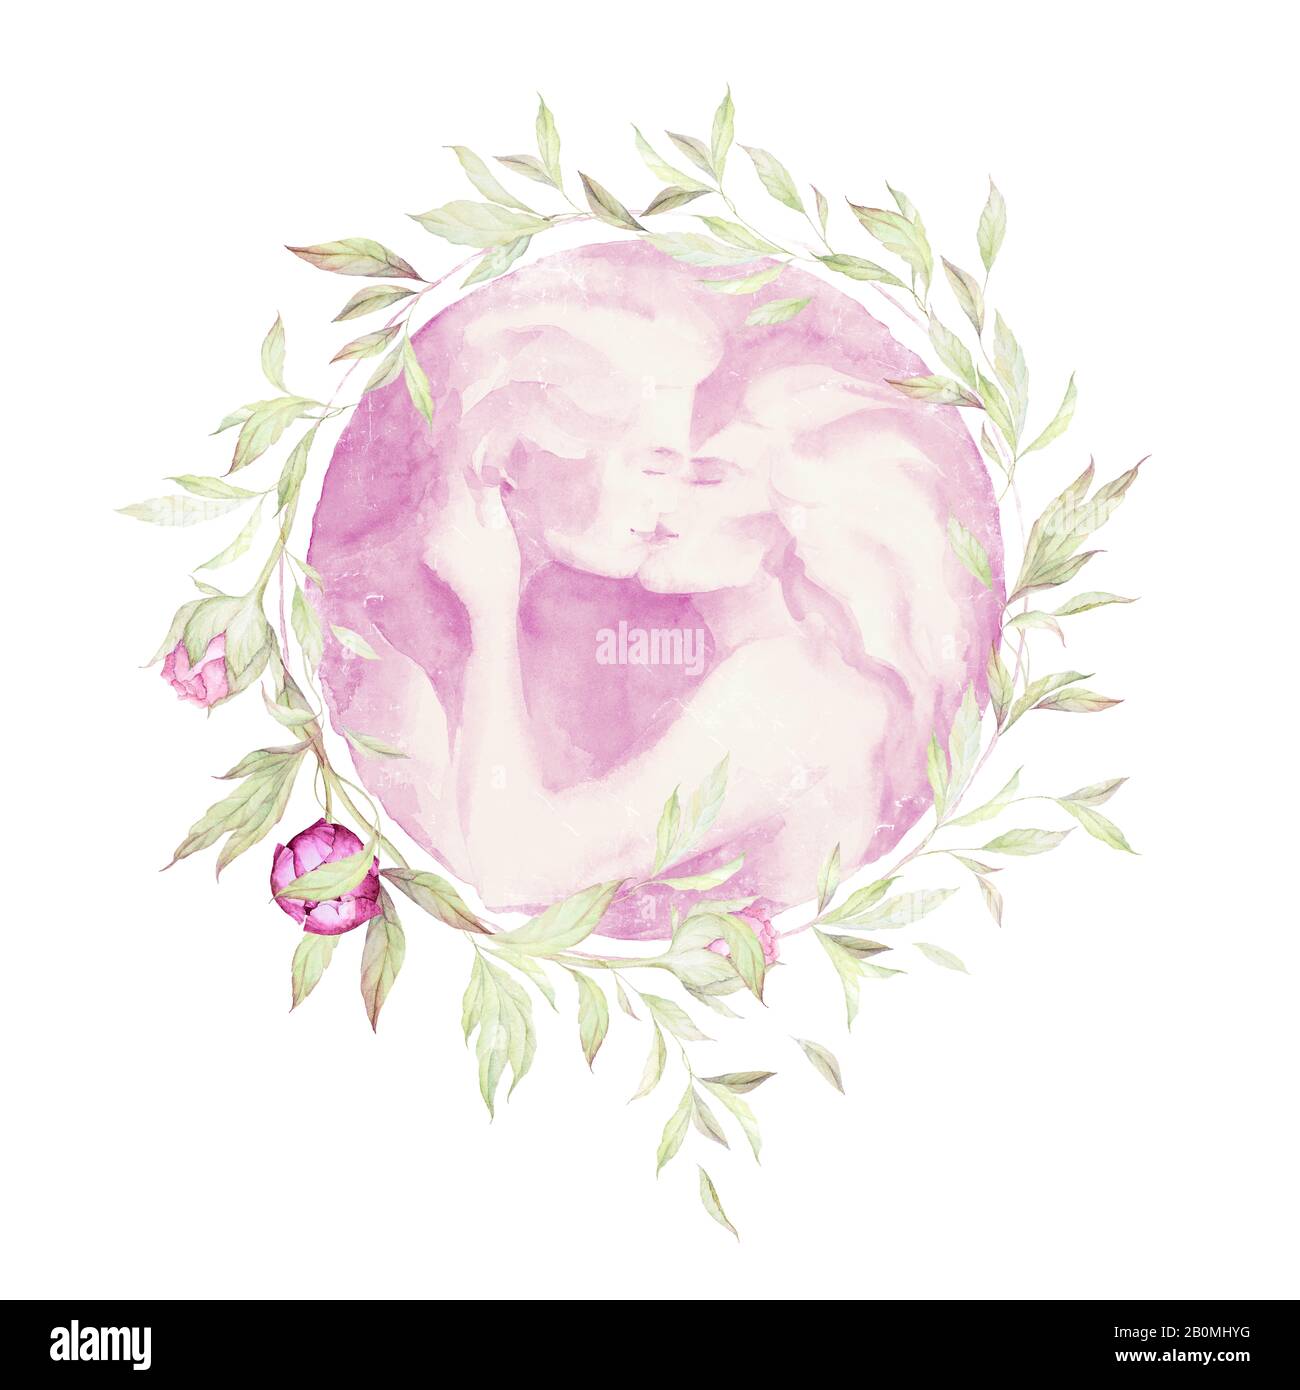 In Love. Couple in Love Kiss. Romantic. Floral wreather. Peonies buds. Lush leaves. Wedding decor. Watercolor. Pre-made Composition. Print quality. Wh Stock Photo